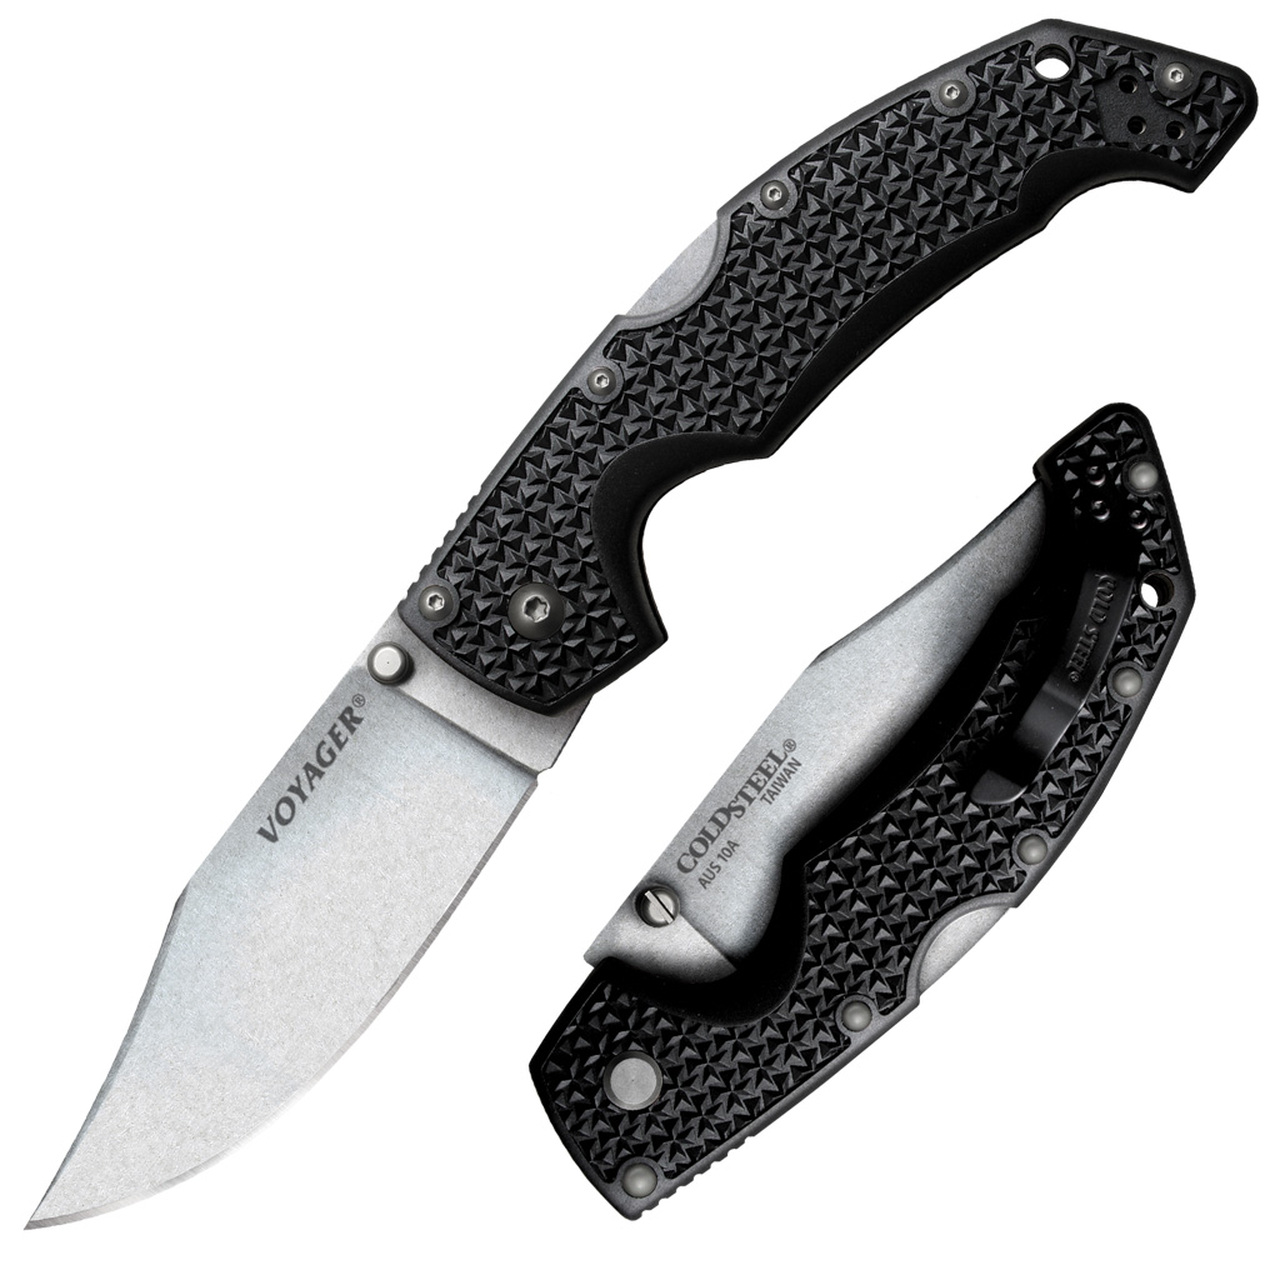 COLD STEEL Large Voyager Lockback 29AC Knife AUS10A Stainless Steel Clip Point Pocket Knives